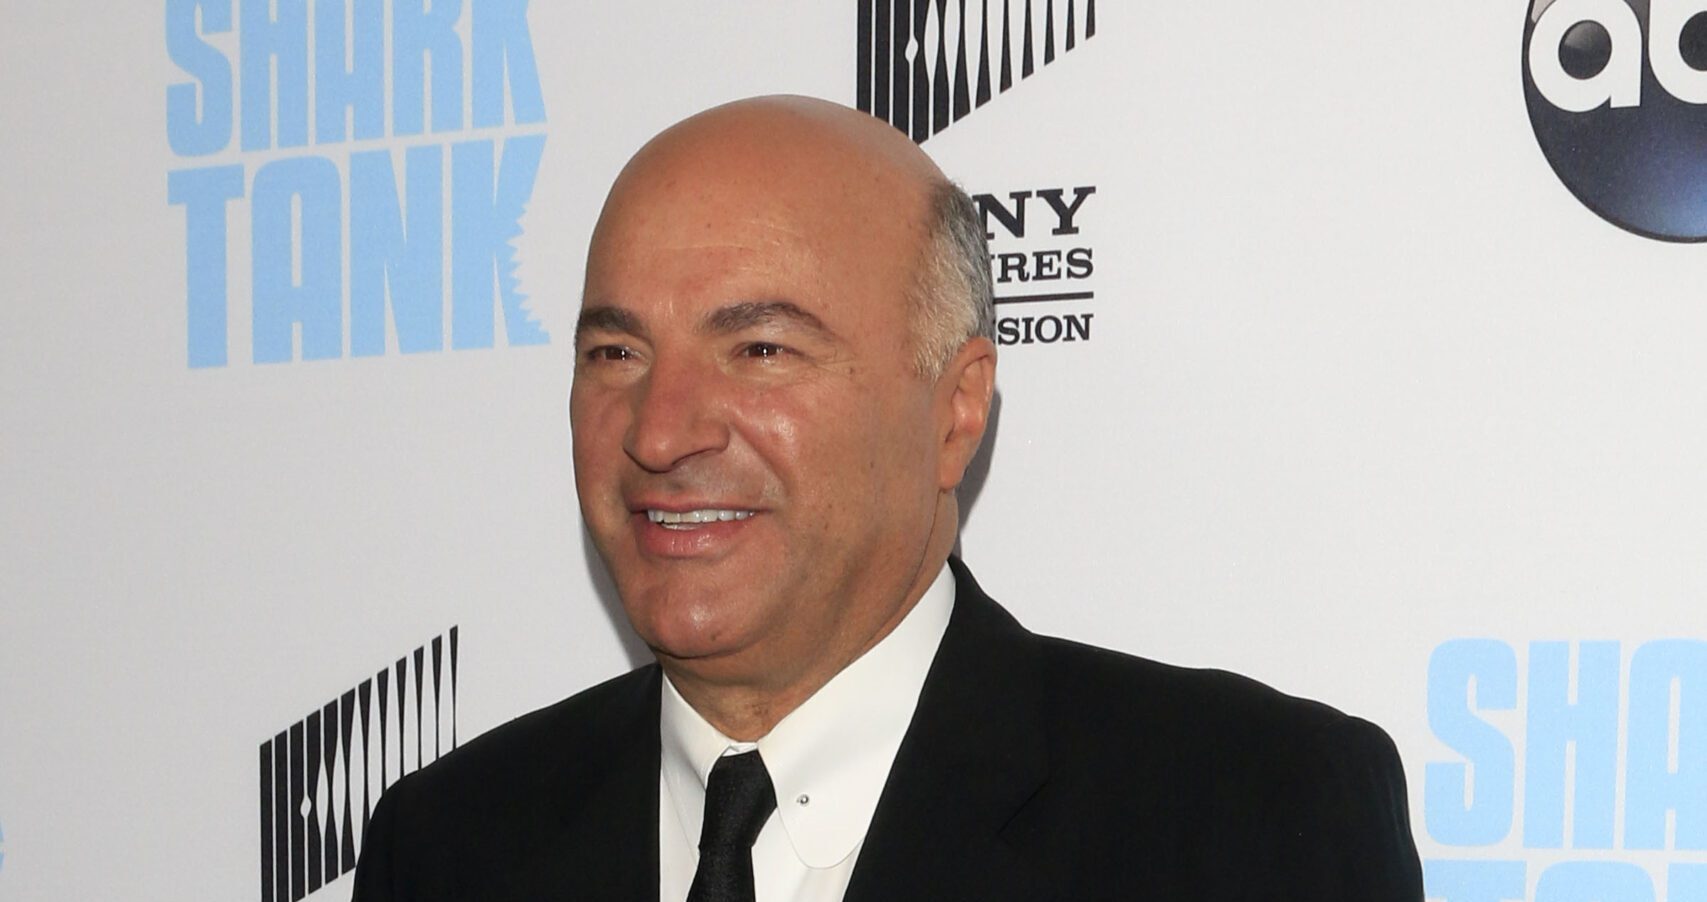 Kevin O'Leary Attending a Shark Tank Premier.